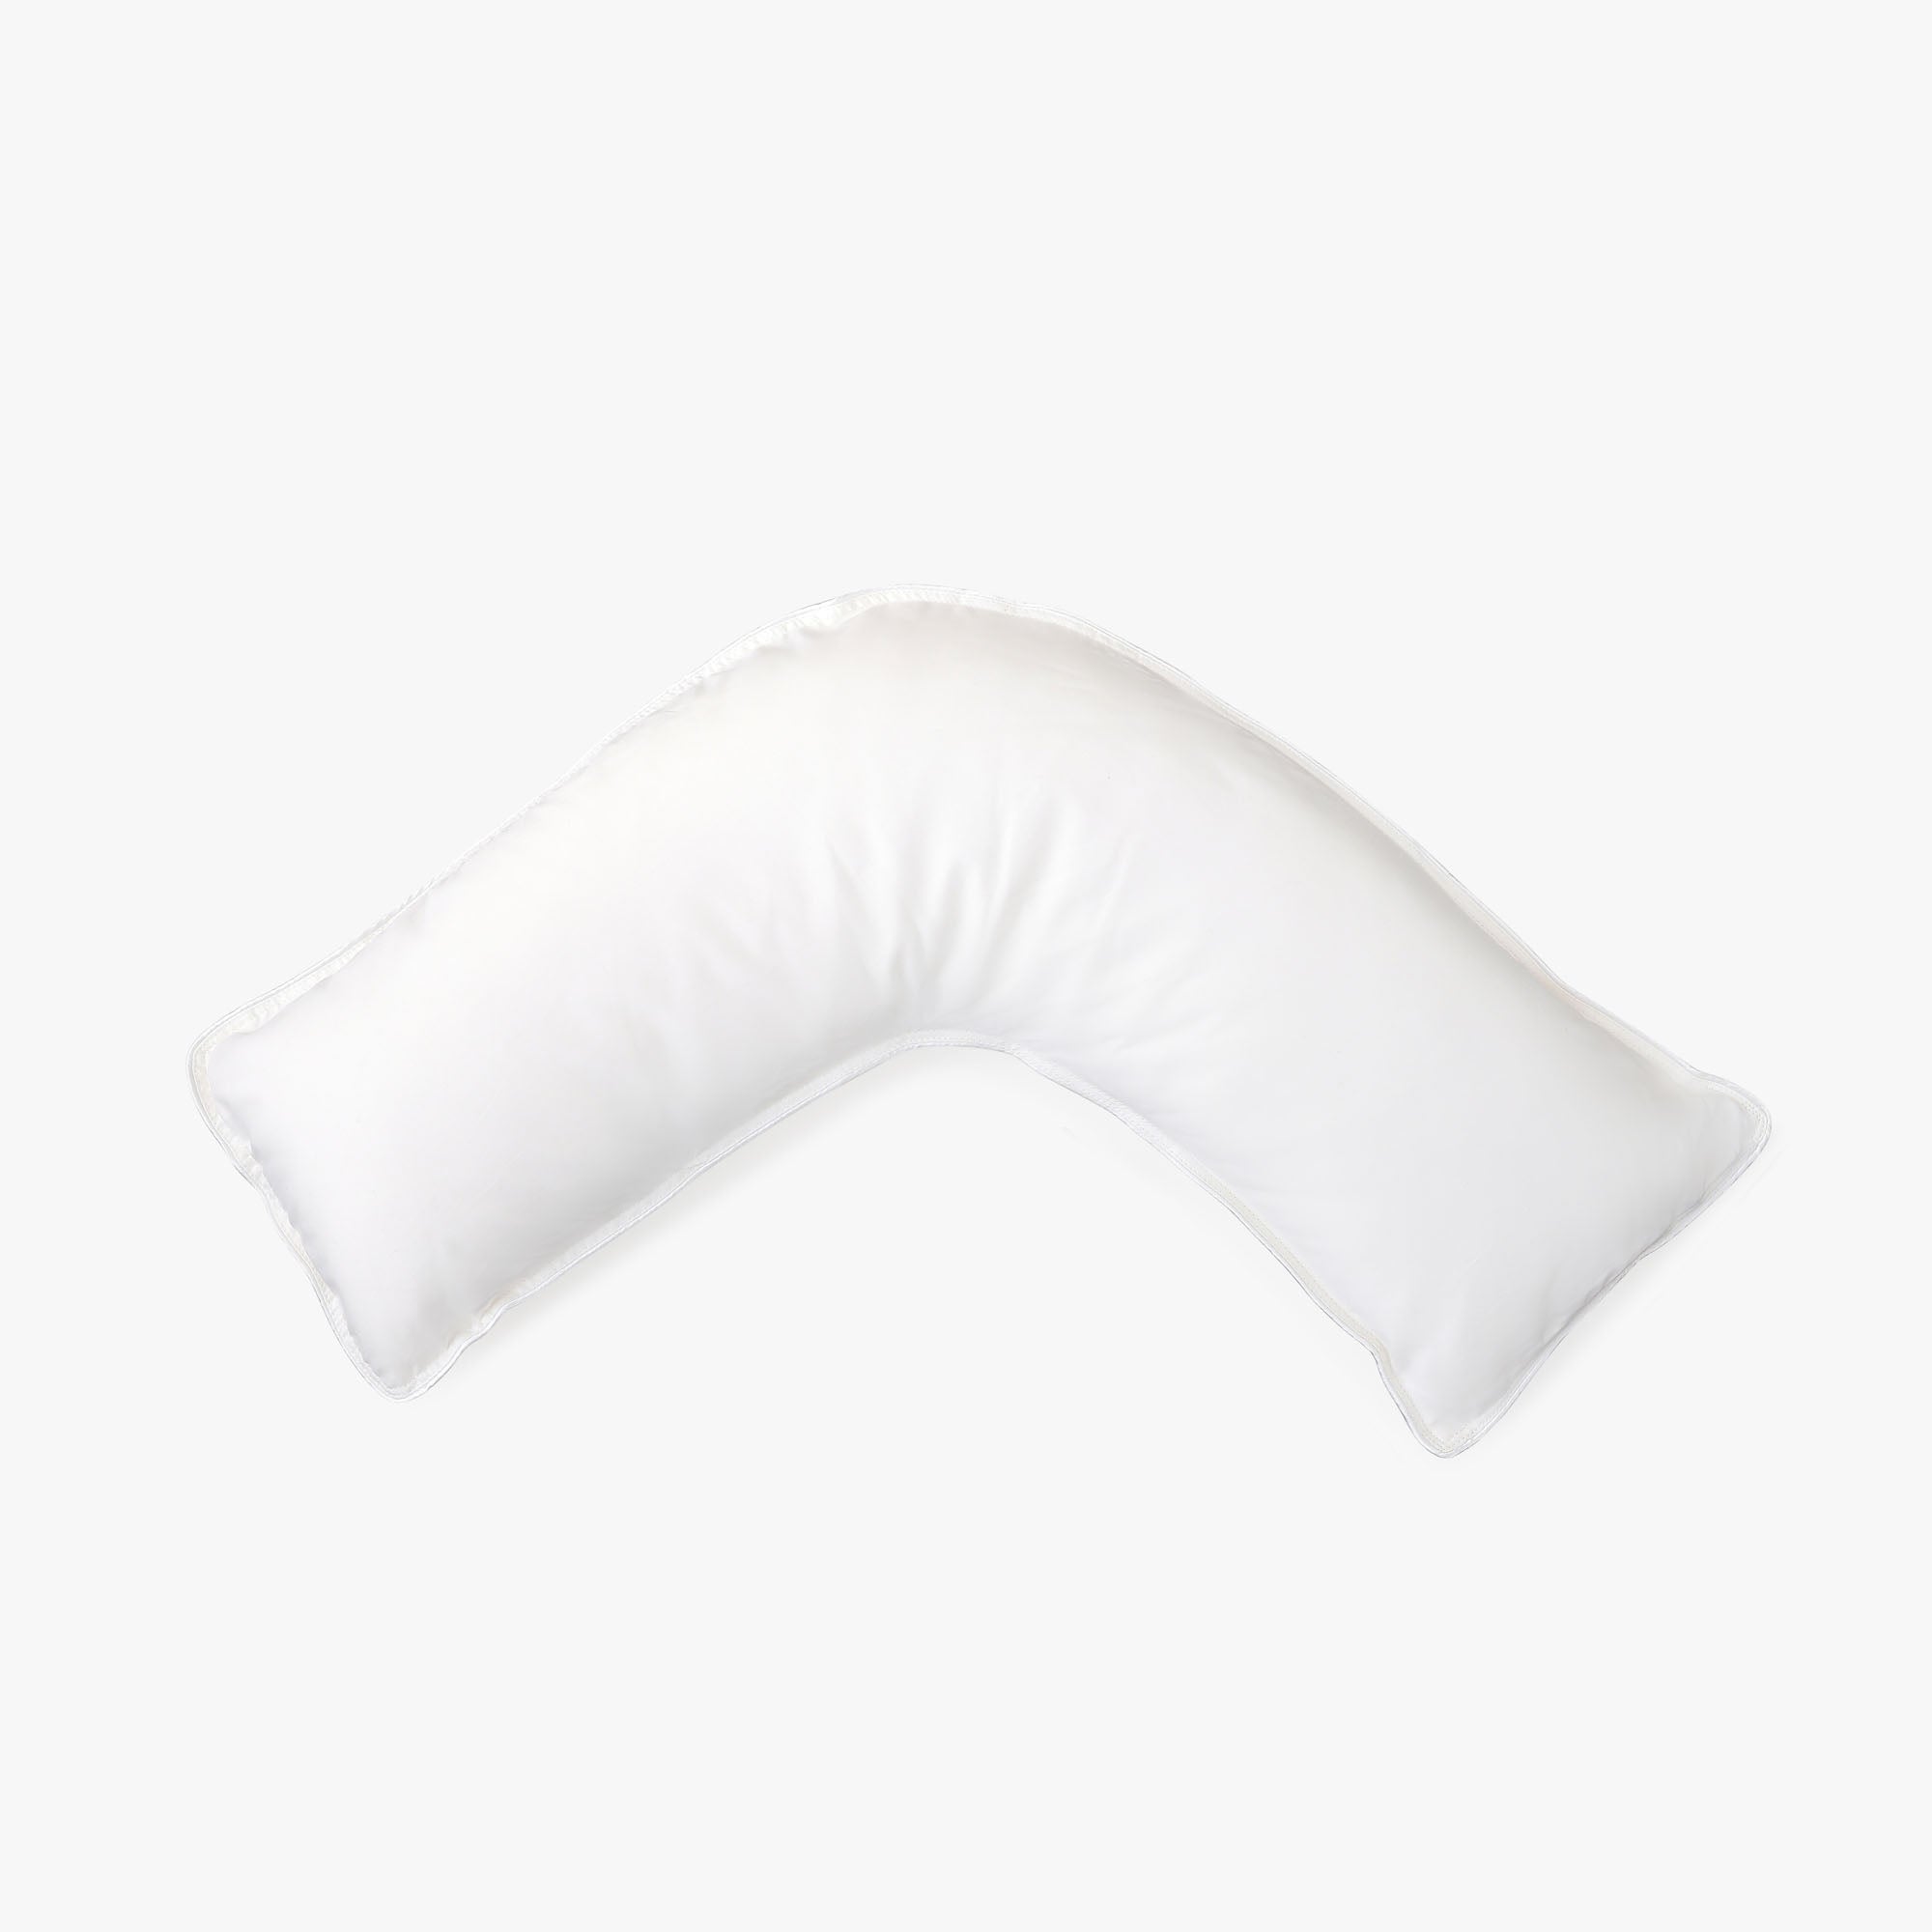 protector for travel pillow